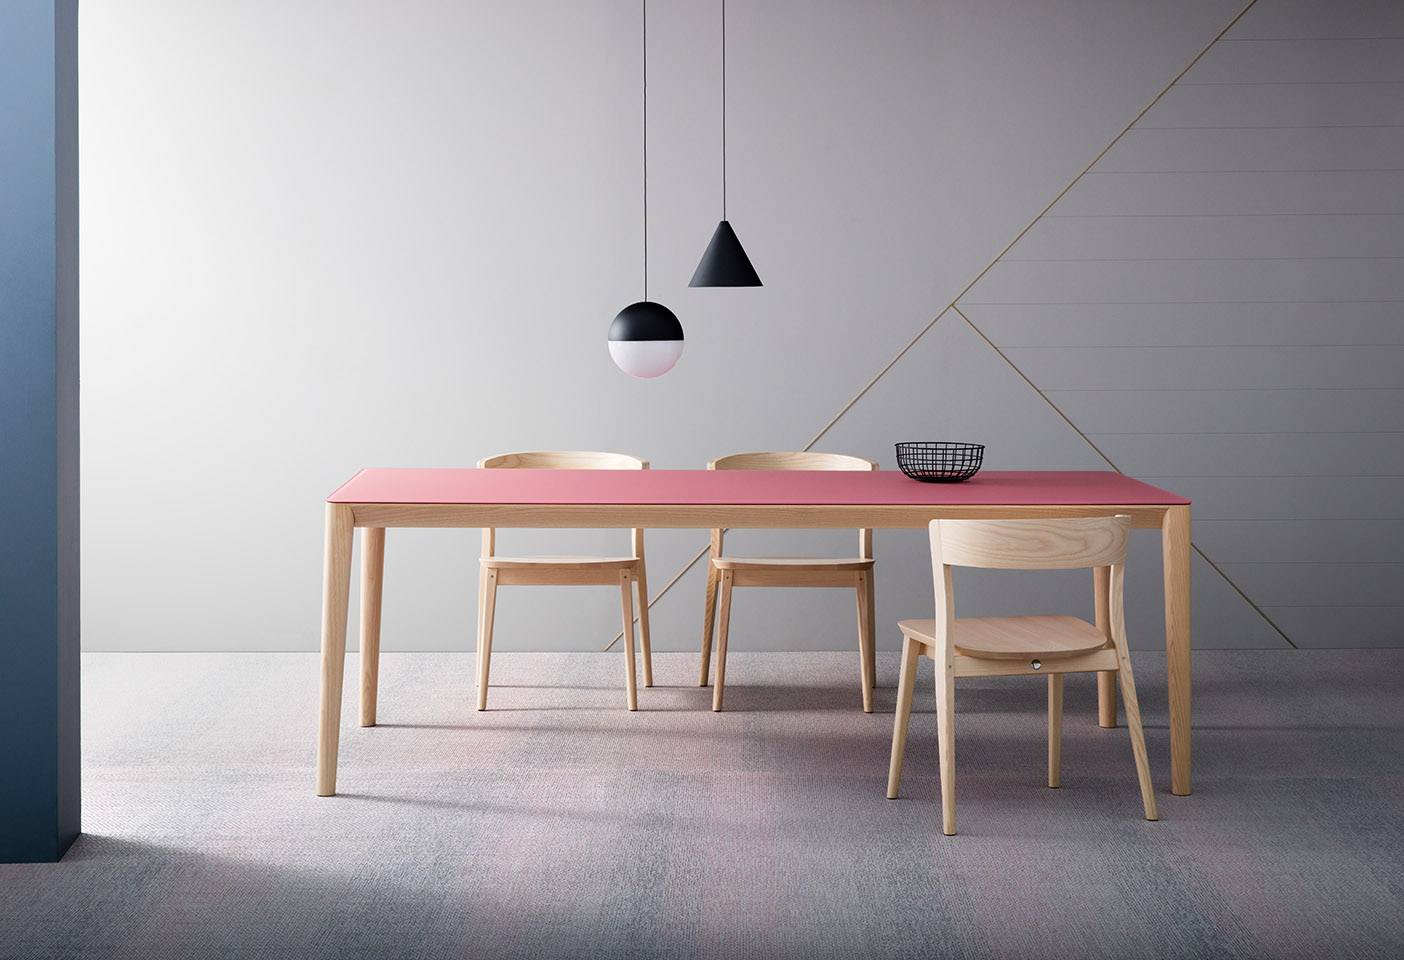 Smith Table and Clarke Chair by Metrica for SP01. Photo c/o SP01.